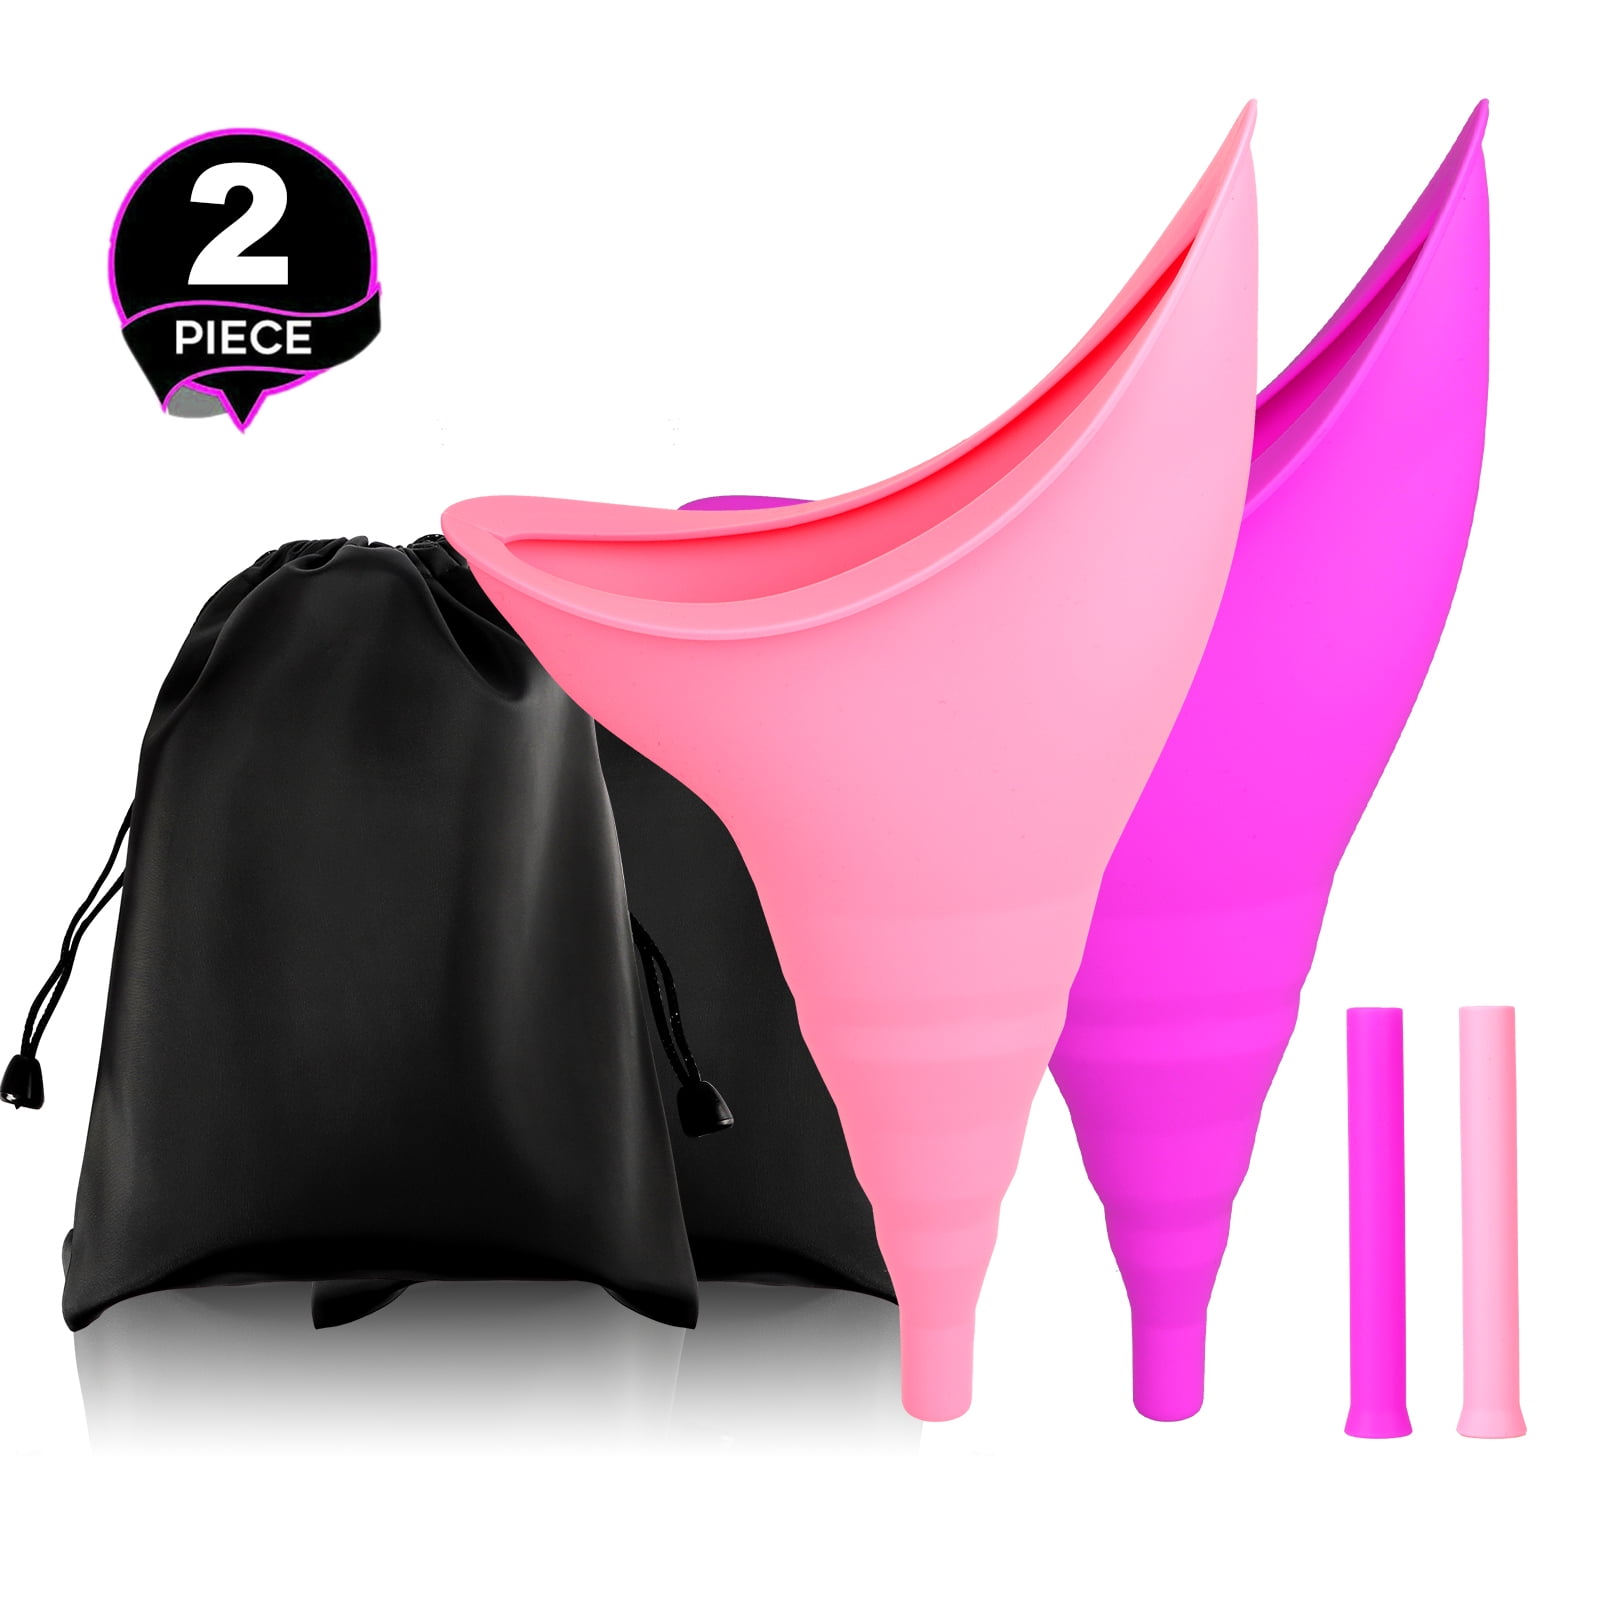 2x Portable Camping Female She Urinal Funnel Ladies Urine Wee Loo Travel Easy UK 